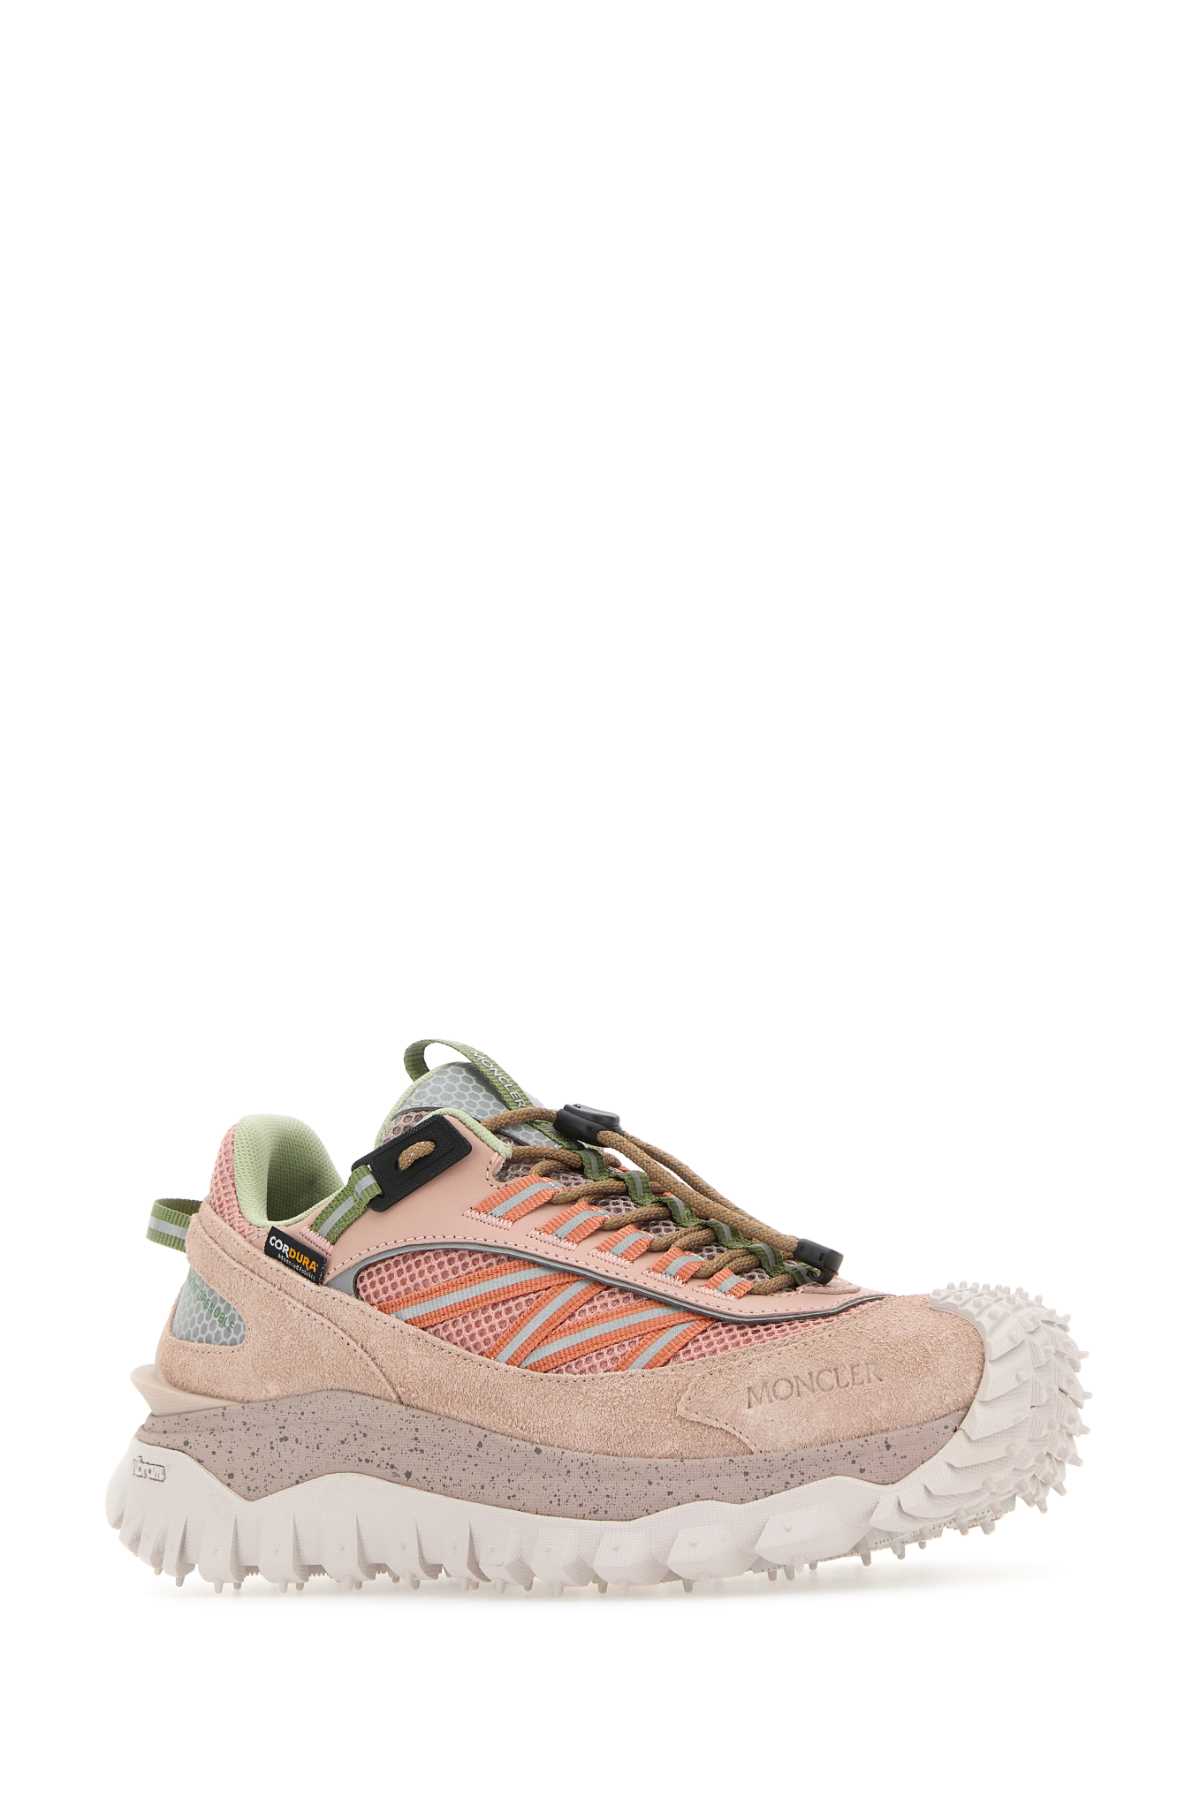 Moncler Multicolor Fabric And Leather Trailgrip Sneakers In 516